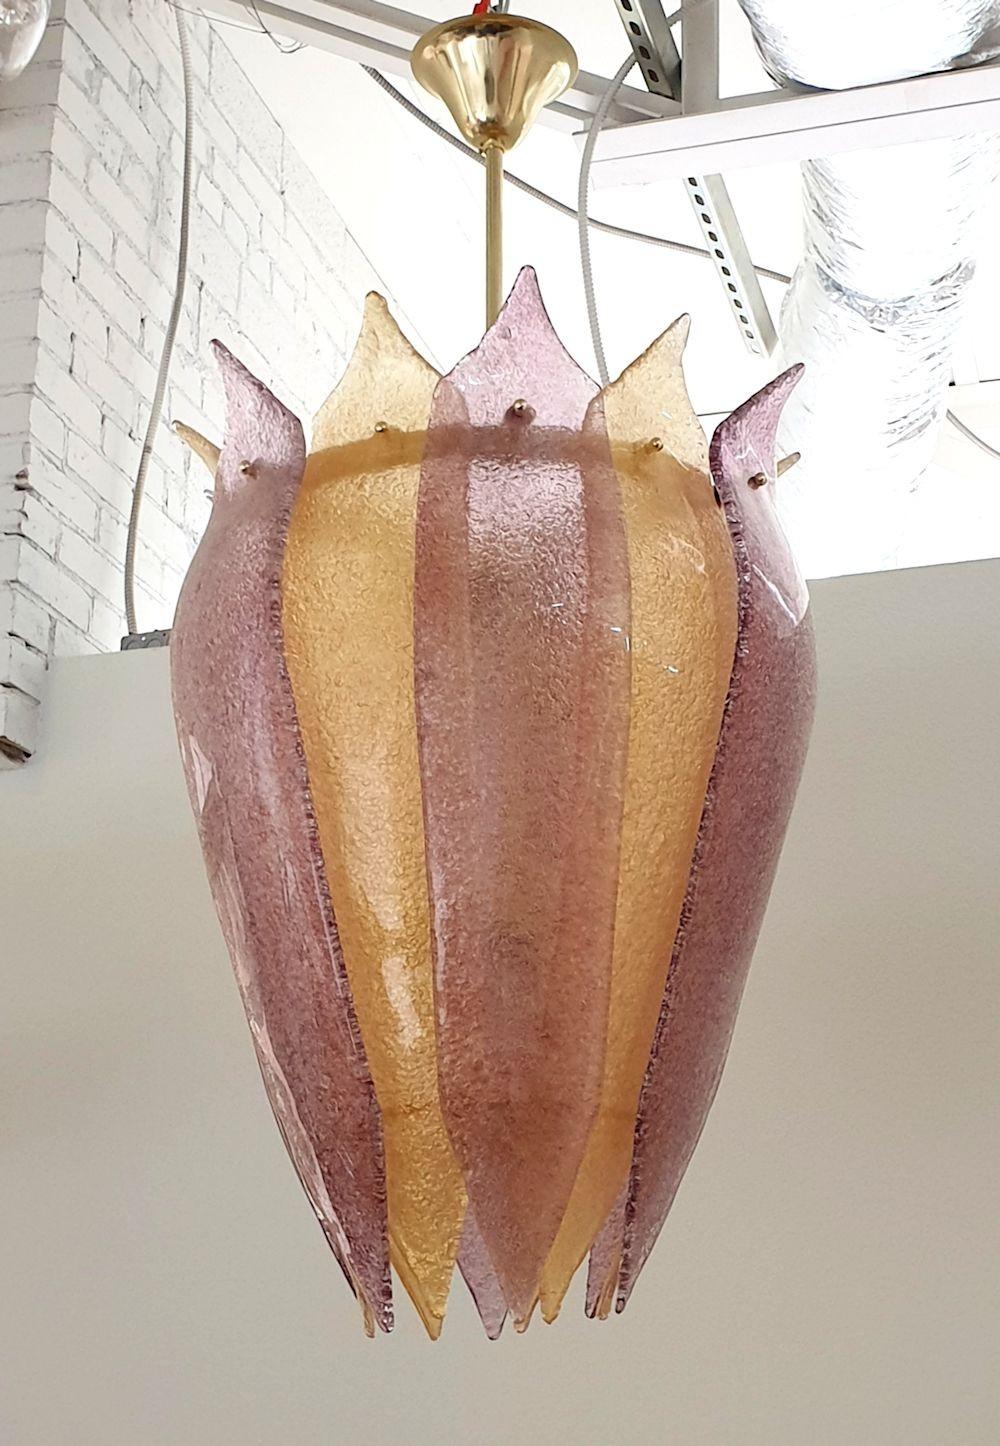 Large Murano glass two tones lantern or chandelier, Italy, circa 2010s.
The large chandelier is made of purple and gold color Murano glass pieces, over a brass and gold plated frame.
The lantern has a kind of tulip shape.
Fits in a Mid Century